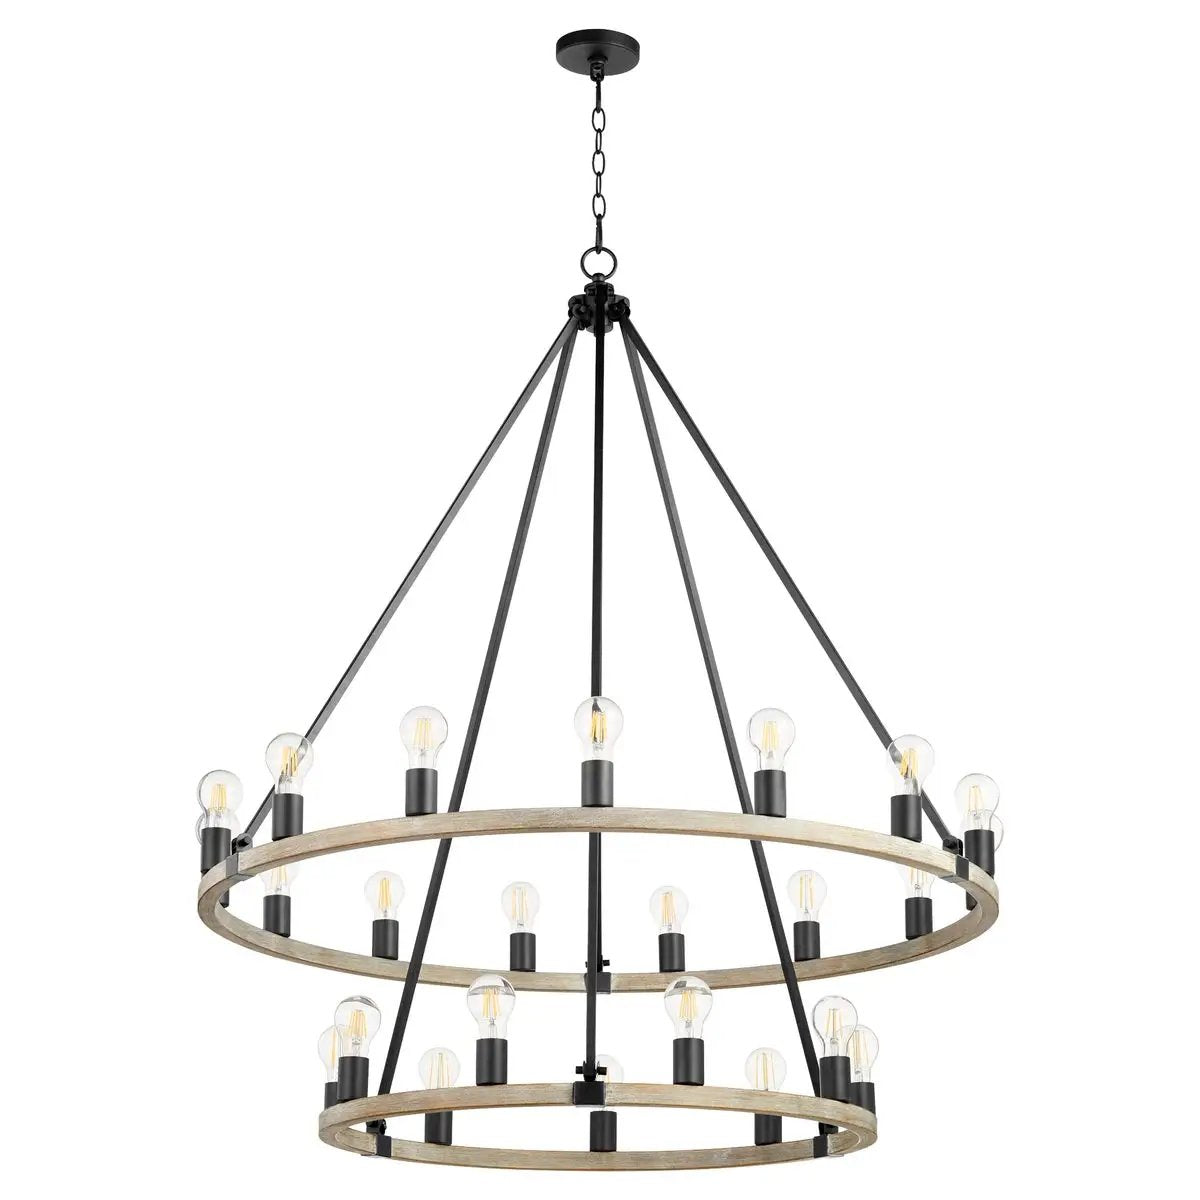 Double Wagon Wheel Chandelier with stacked, dual-layer rounded frame and 24 exposed medium base sockets. Noir and weathered oak finishes create a rustic aesthetic. Perfect for indoor and outdoor spaces.